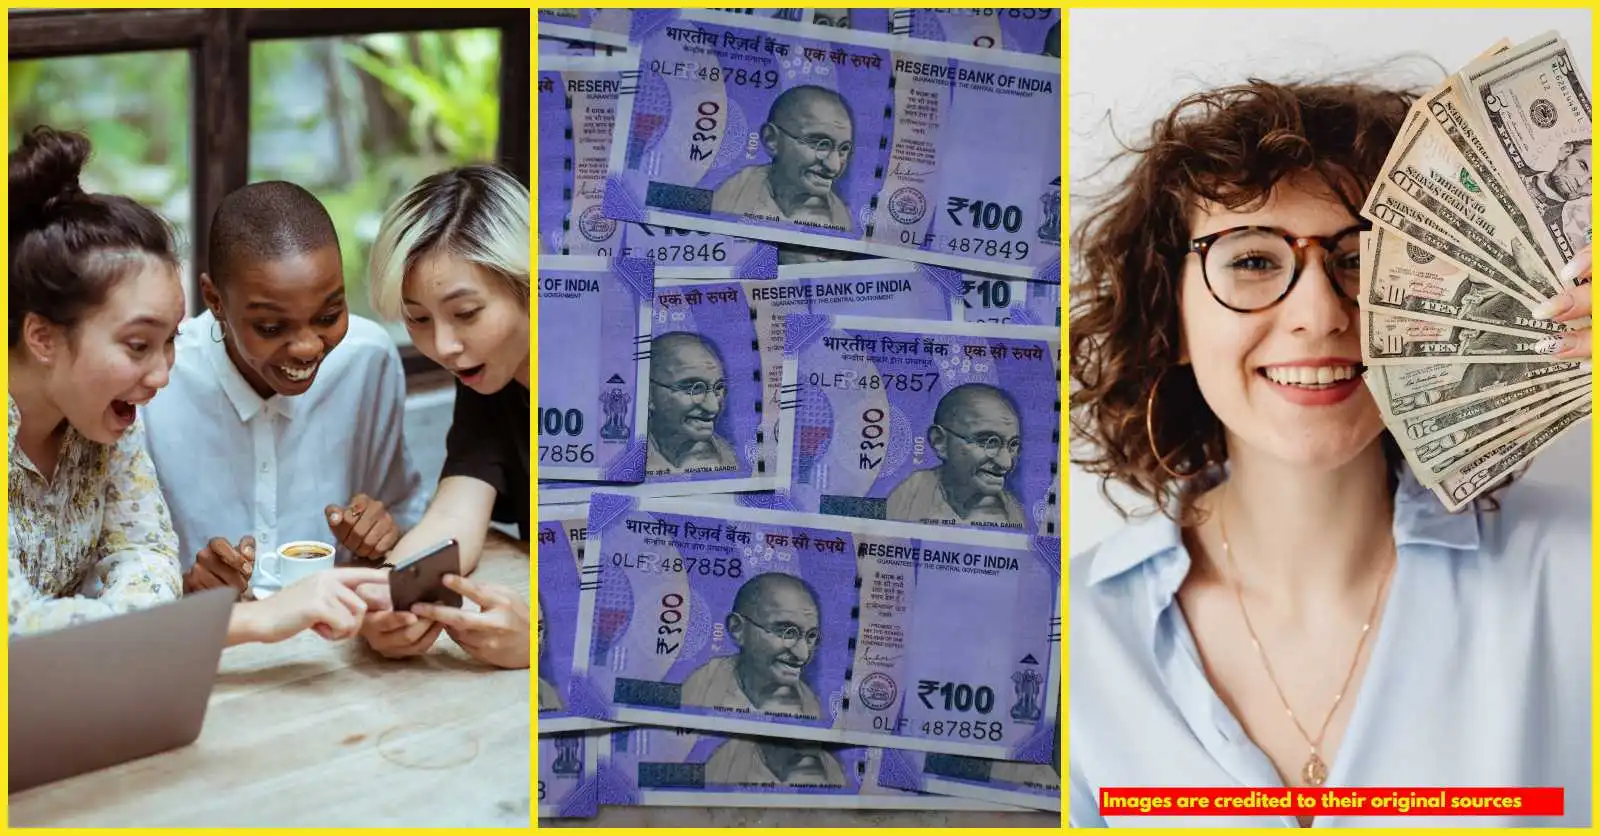 Hers is more details of about getting a Personal Loan from bandhan bank- Eligibility, Documents required, benefits, interest rate and other details explained